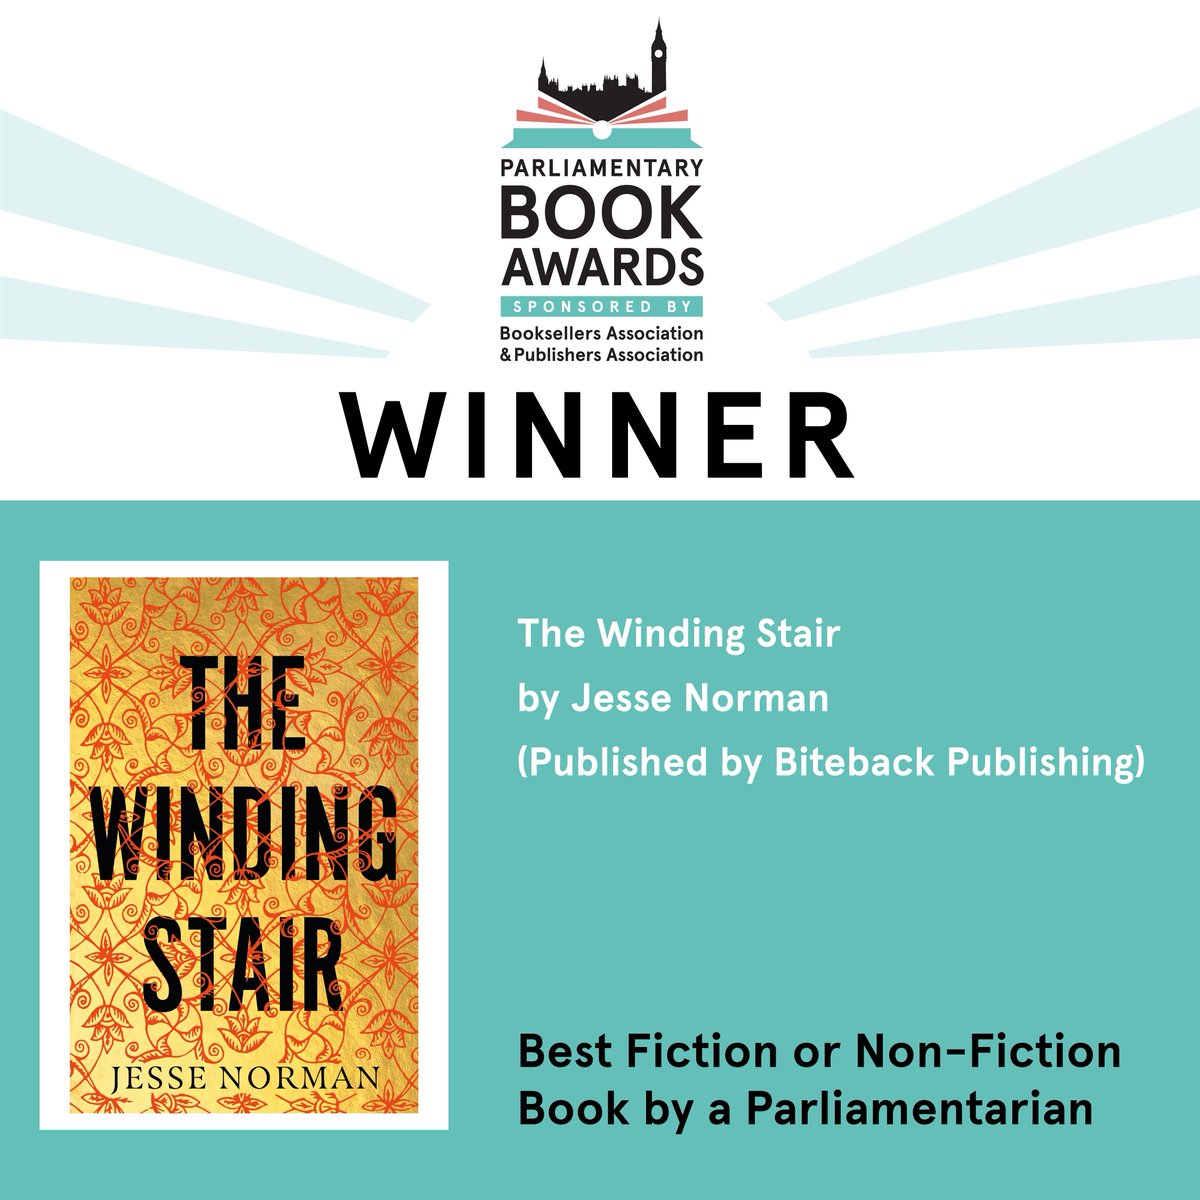 The winner of Best Fiction or Non-Fiction by a Parliamentarian is The Winding Stair by @Jesse_Norman - congratulations! @PublishersAssoc @BitebackPub